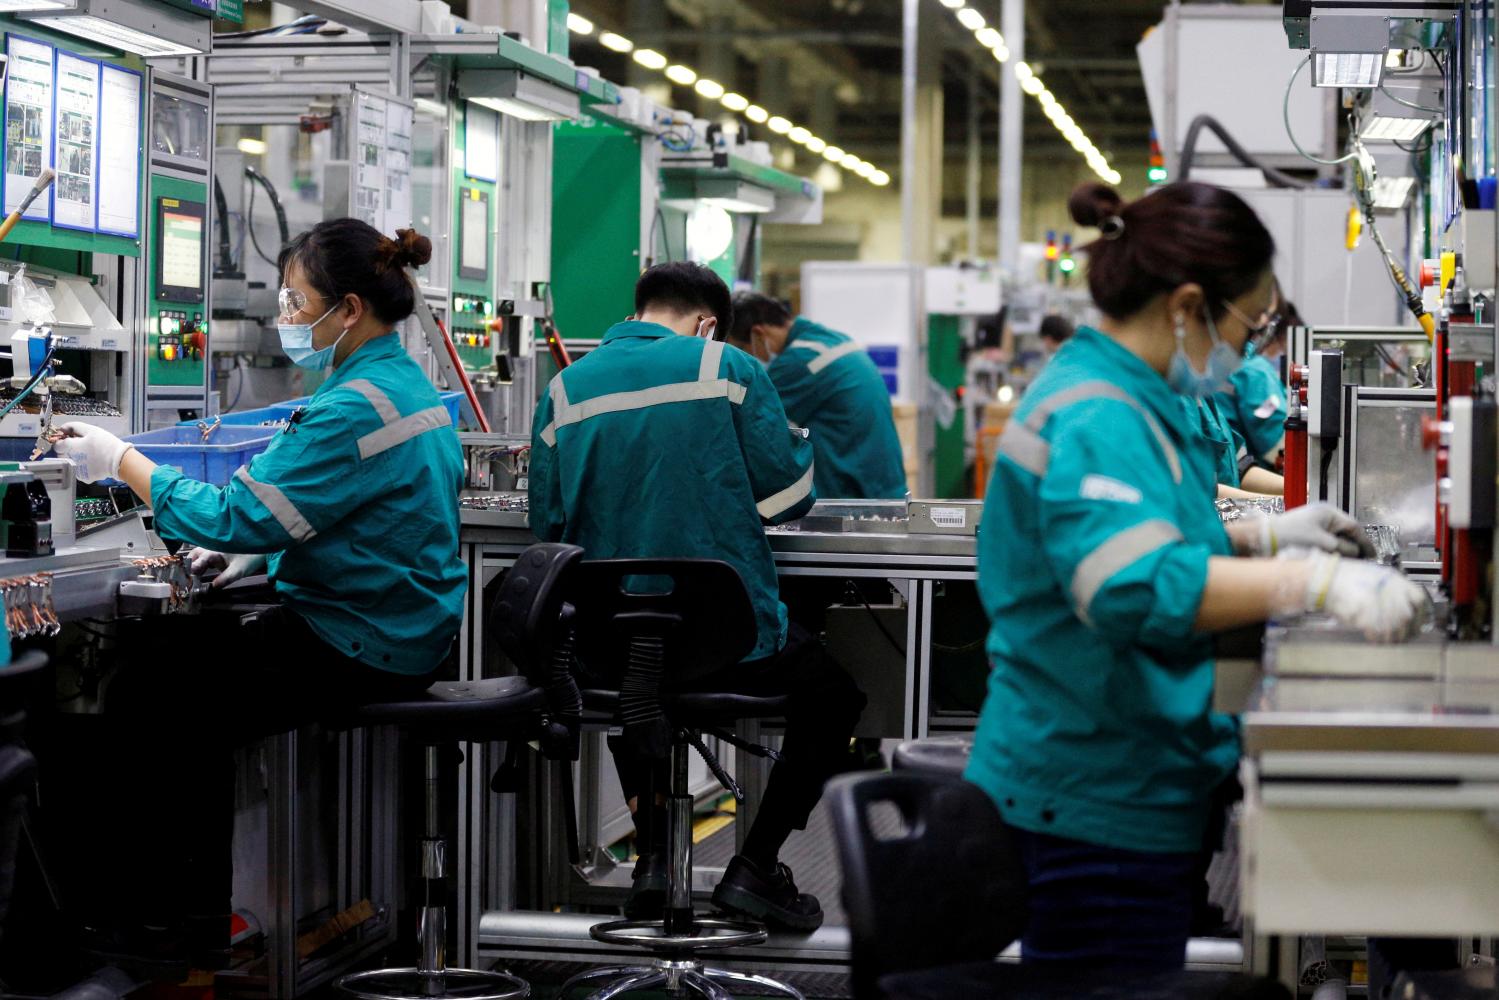 Employees work on a production line during an organised media tour to a Schneider Electric factory in Beijing. (Photo: Reuters)